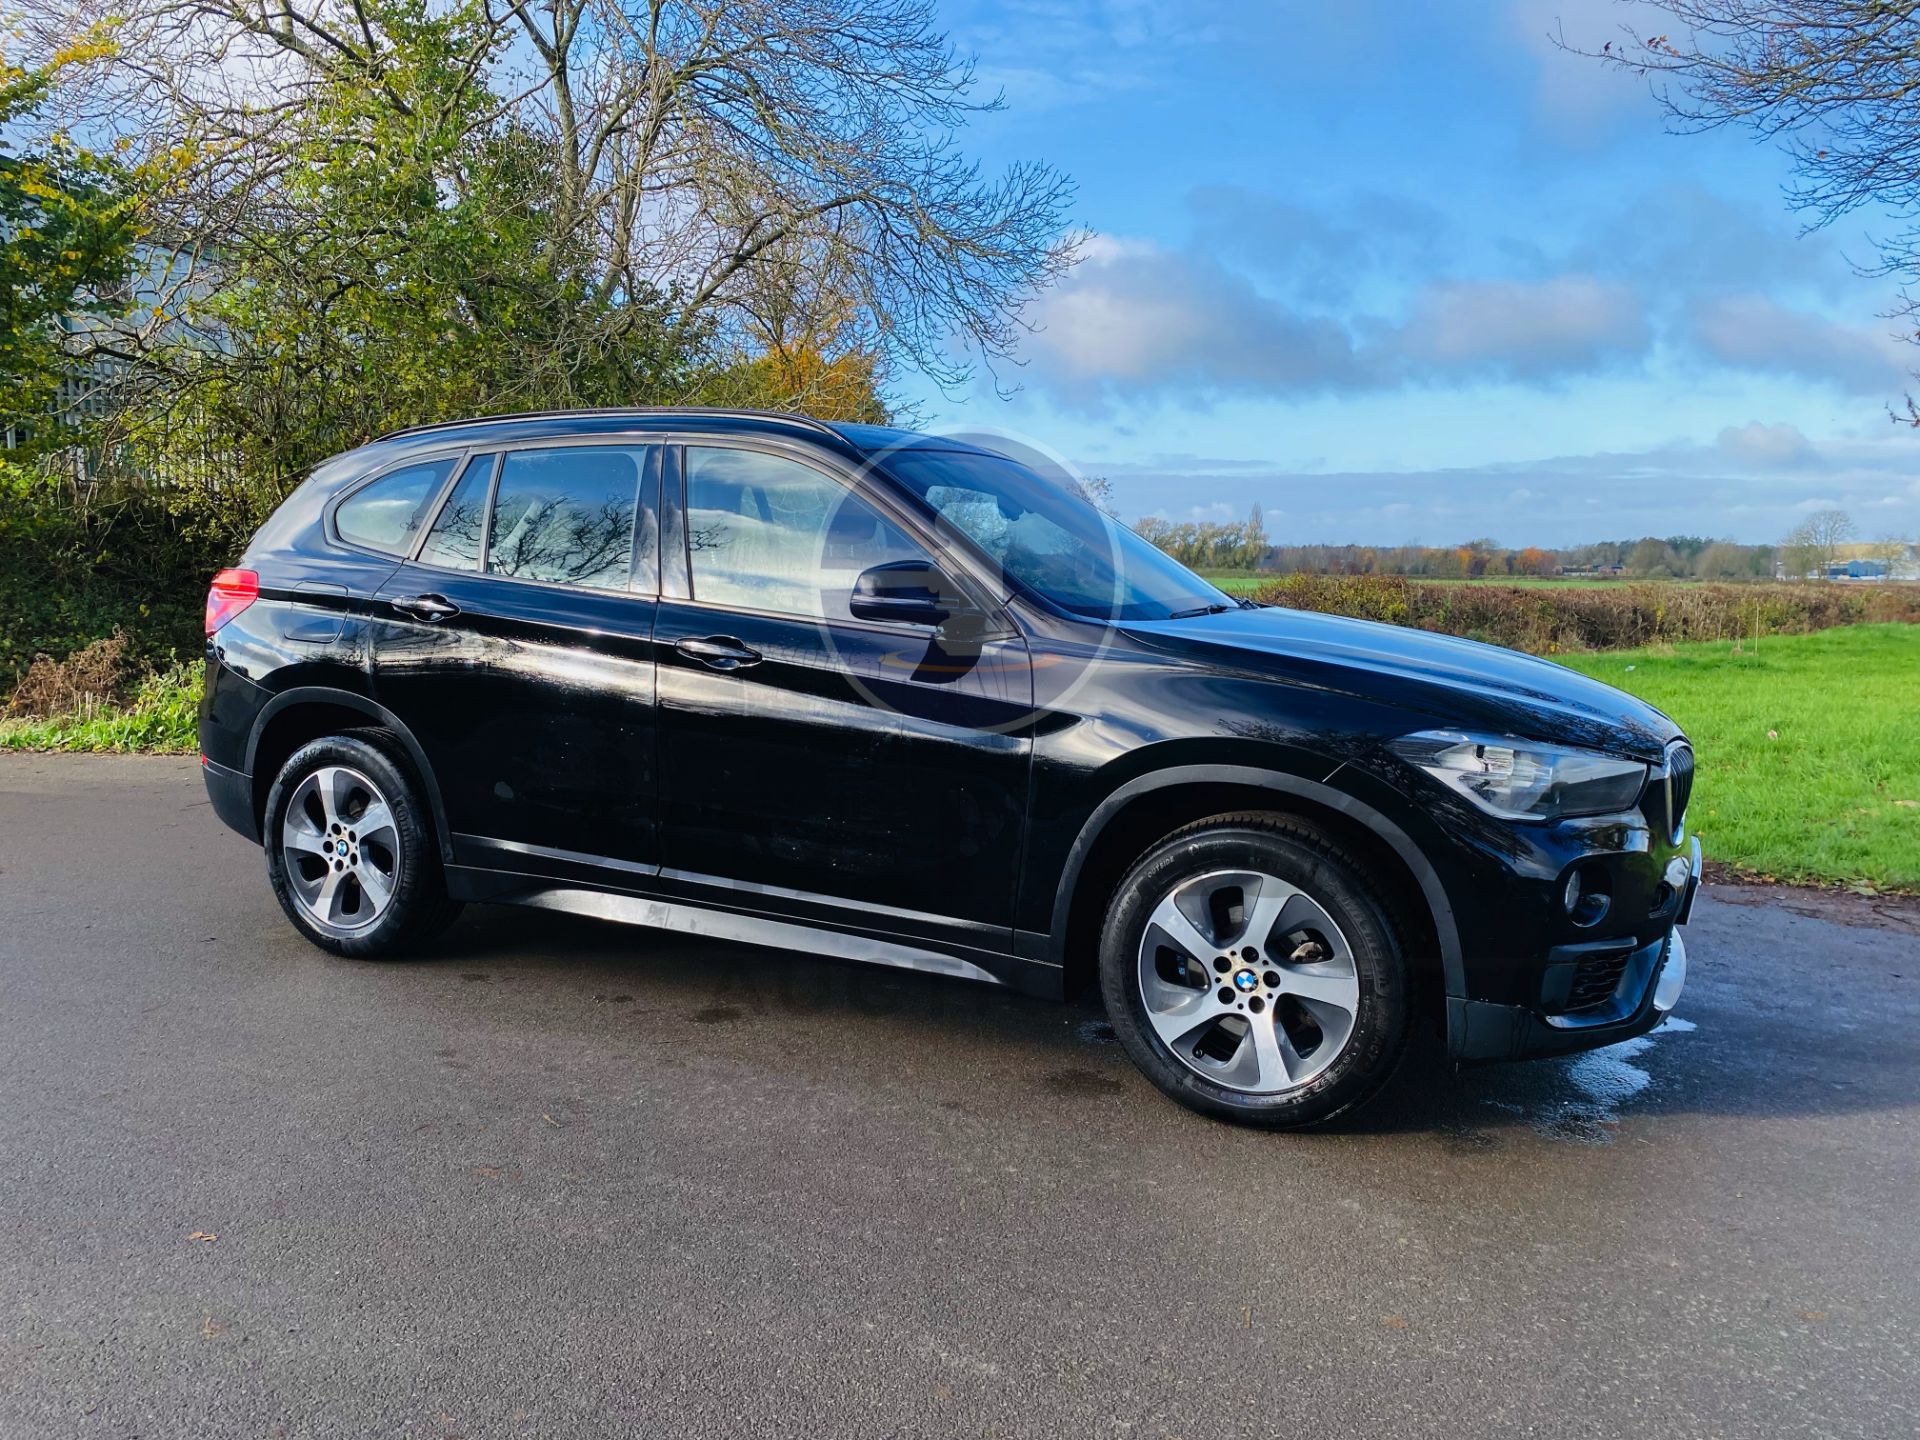 (ON SALE) BMW X1 sDRIVE 18d SE 2.0 DIESEL - 18 REG - 1 OWNER FROM NEW - SAT NAV - AIR CON -